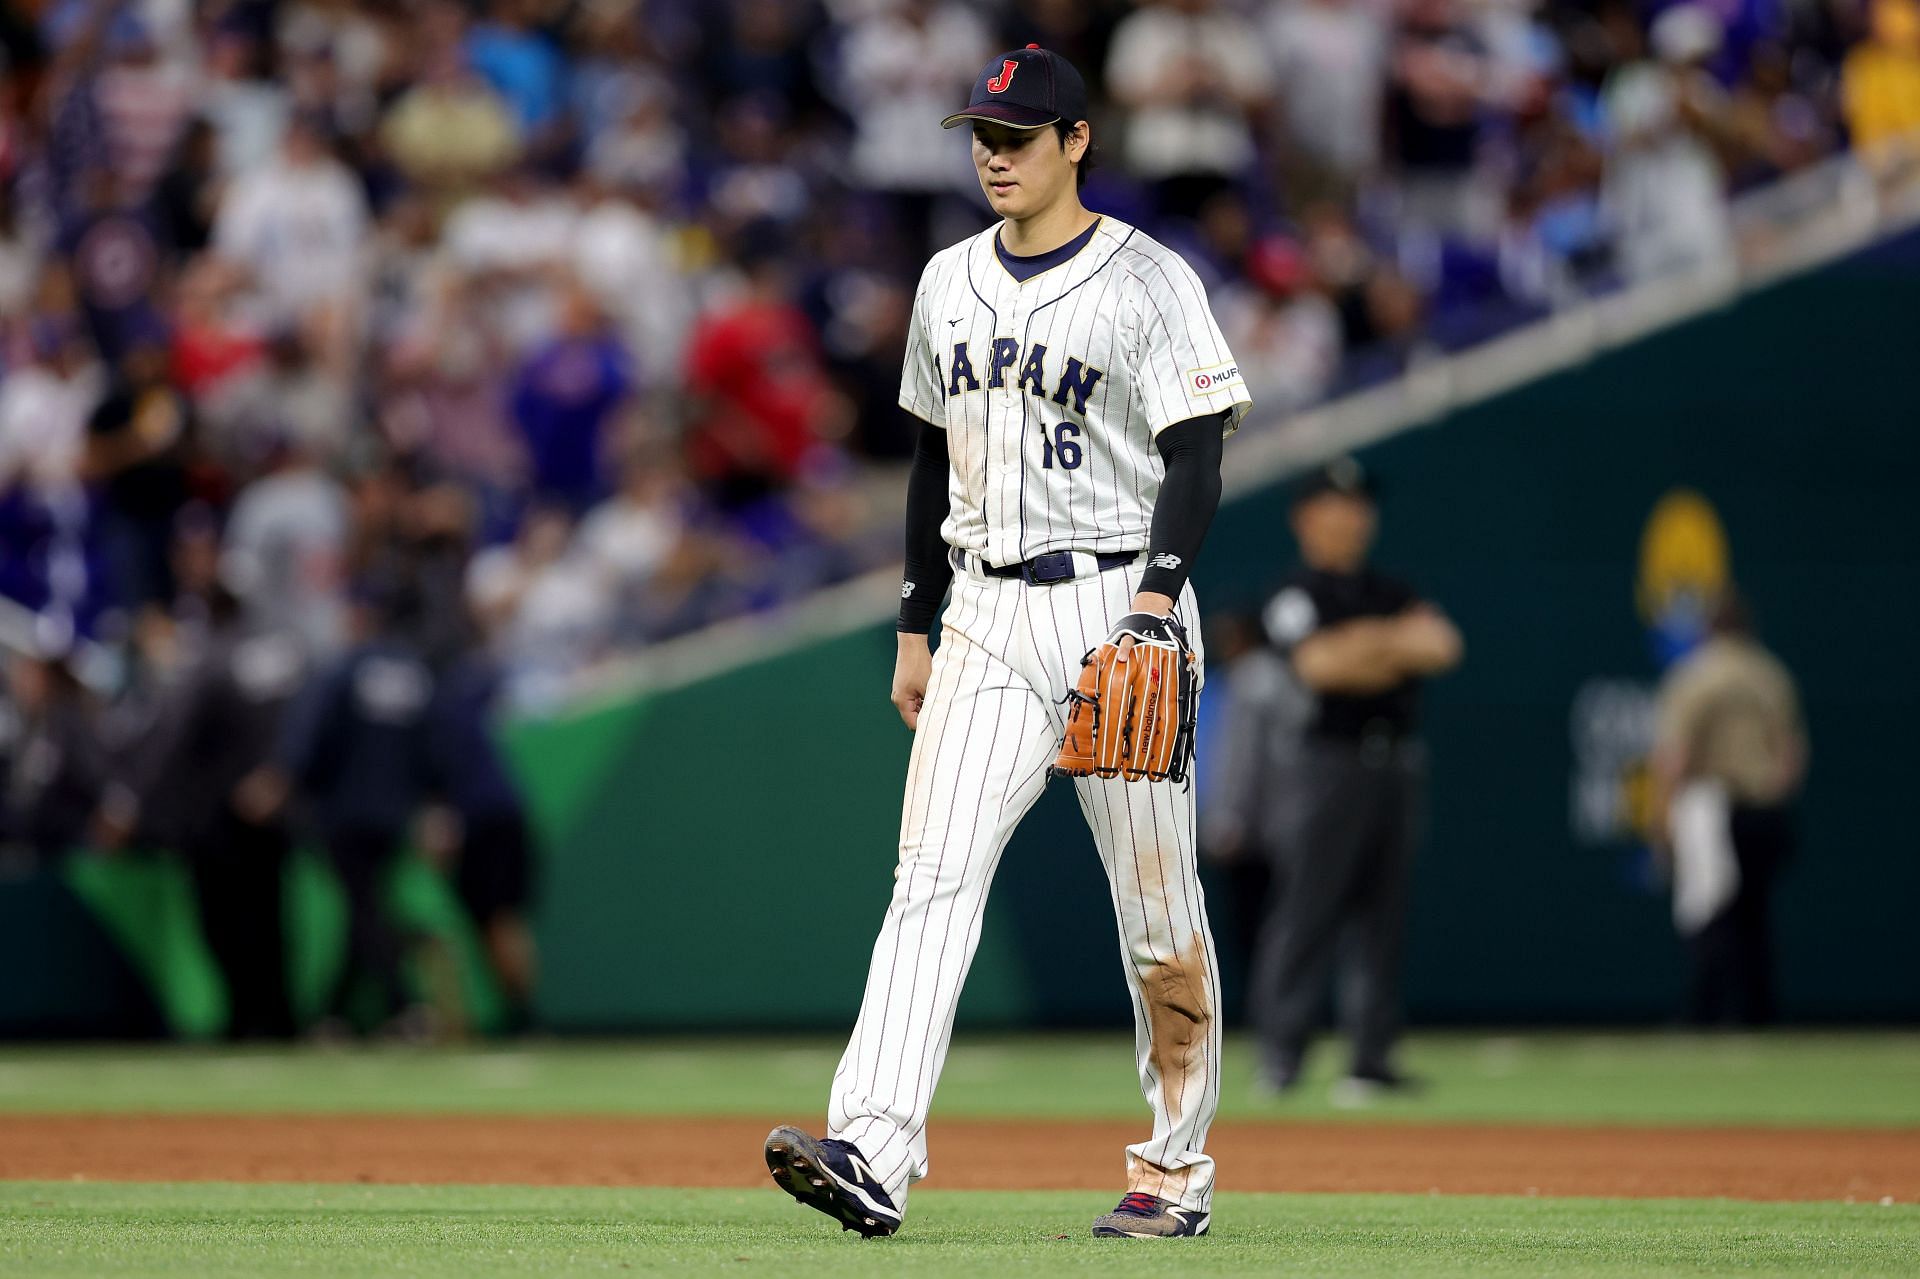 Shohei Ohtani's New Balance Glove Is as Special as He Is